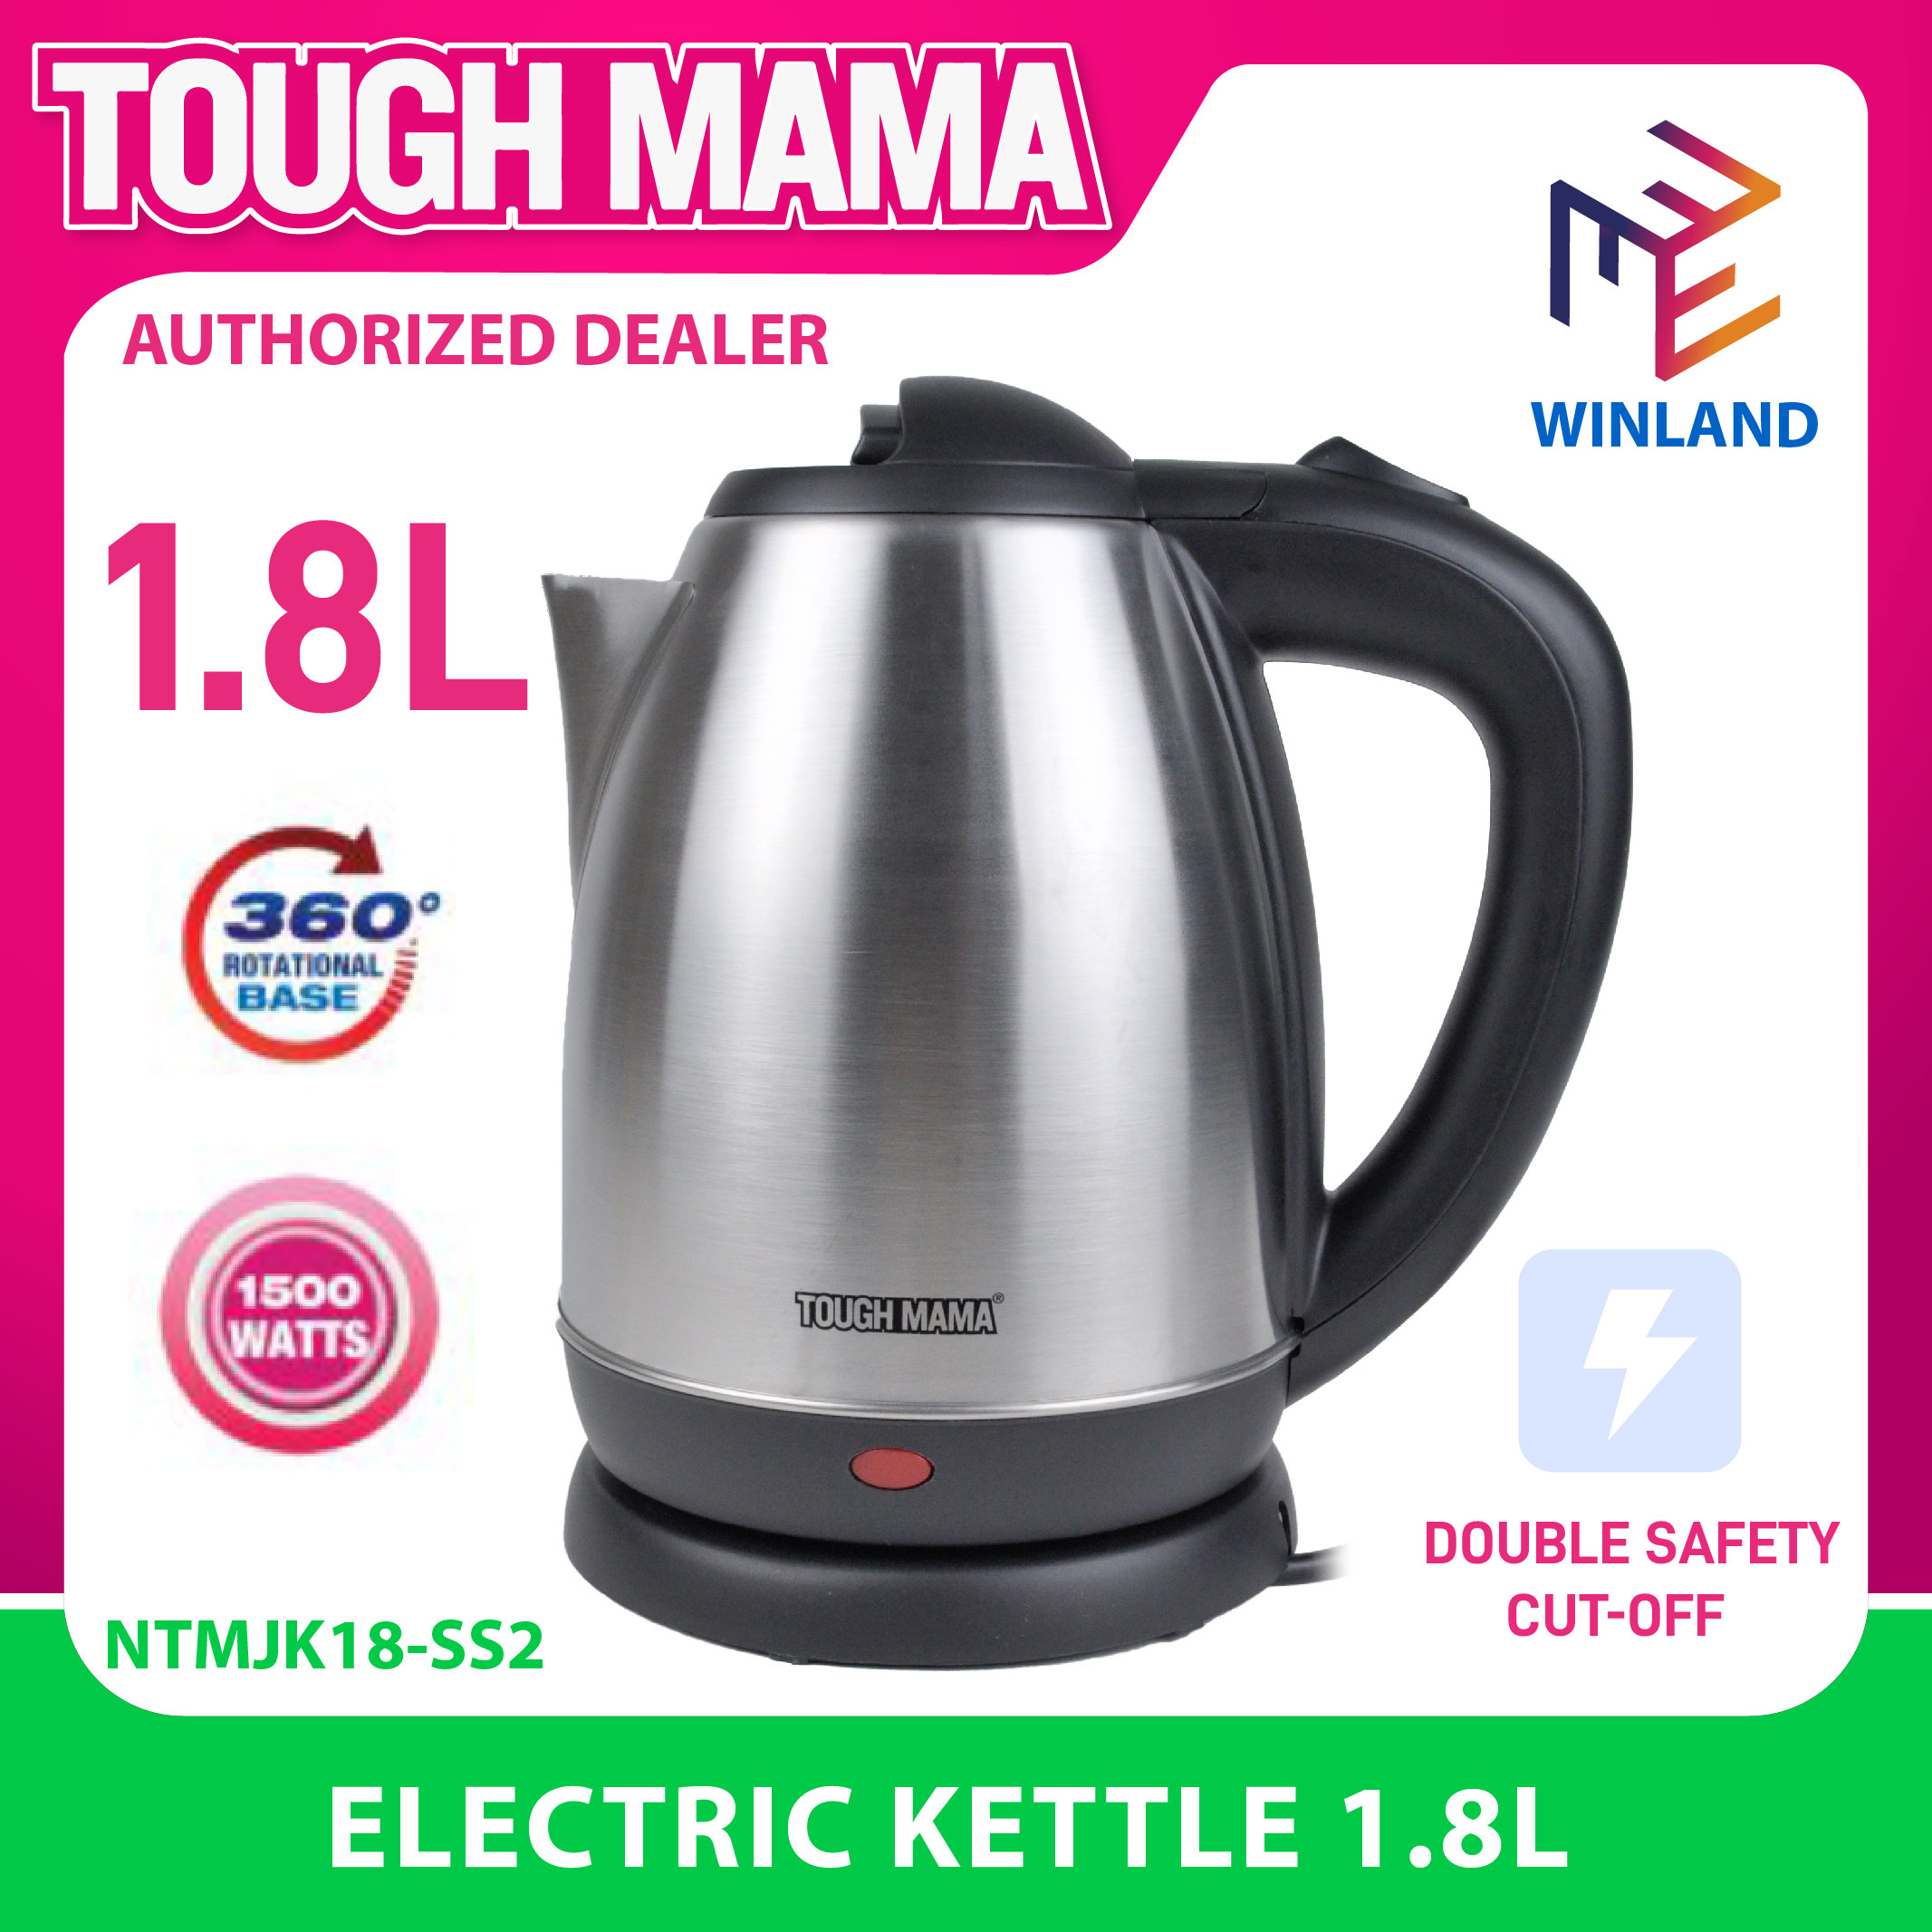 hot kettle price